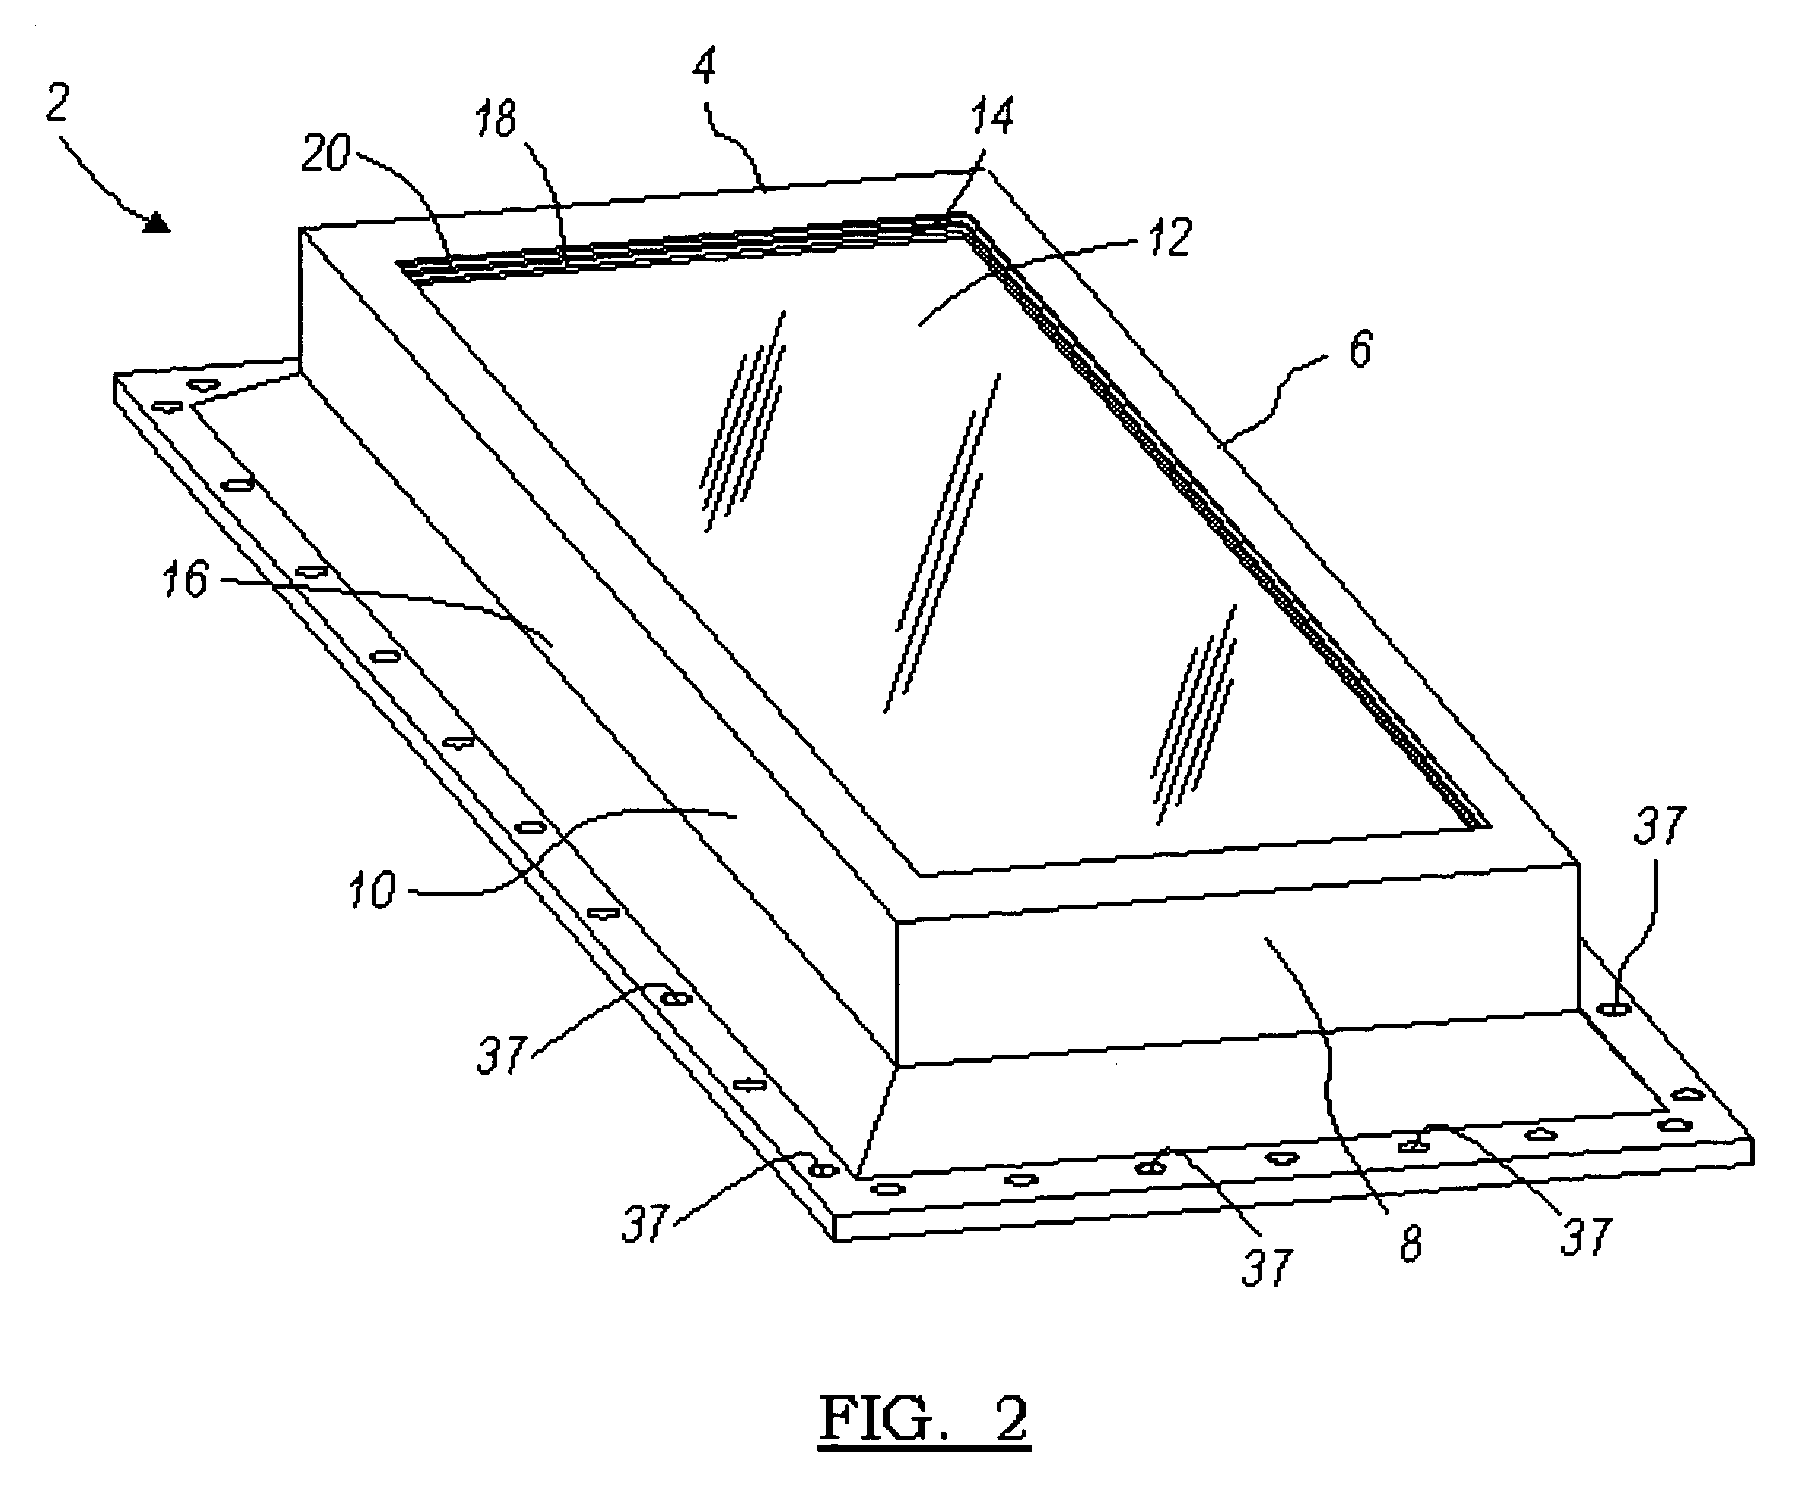 Window-containing assemblies having a molded plastic frame